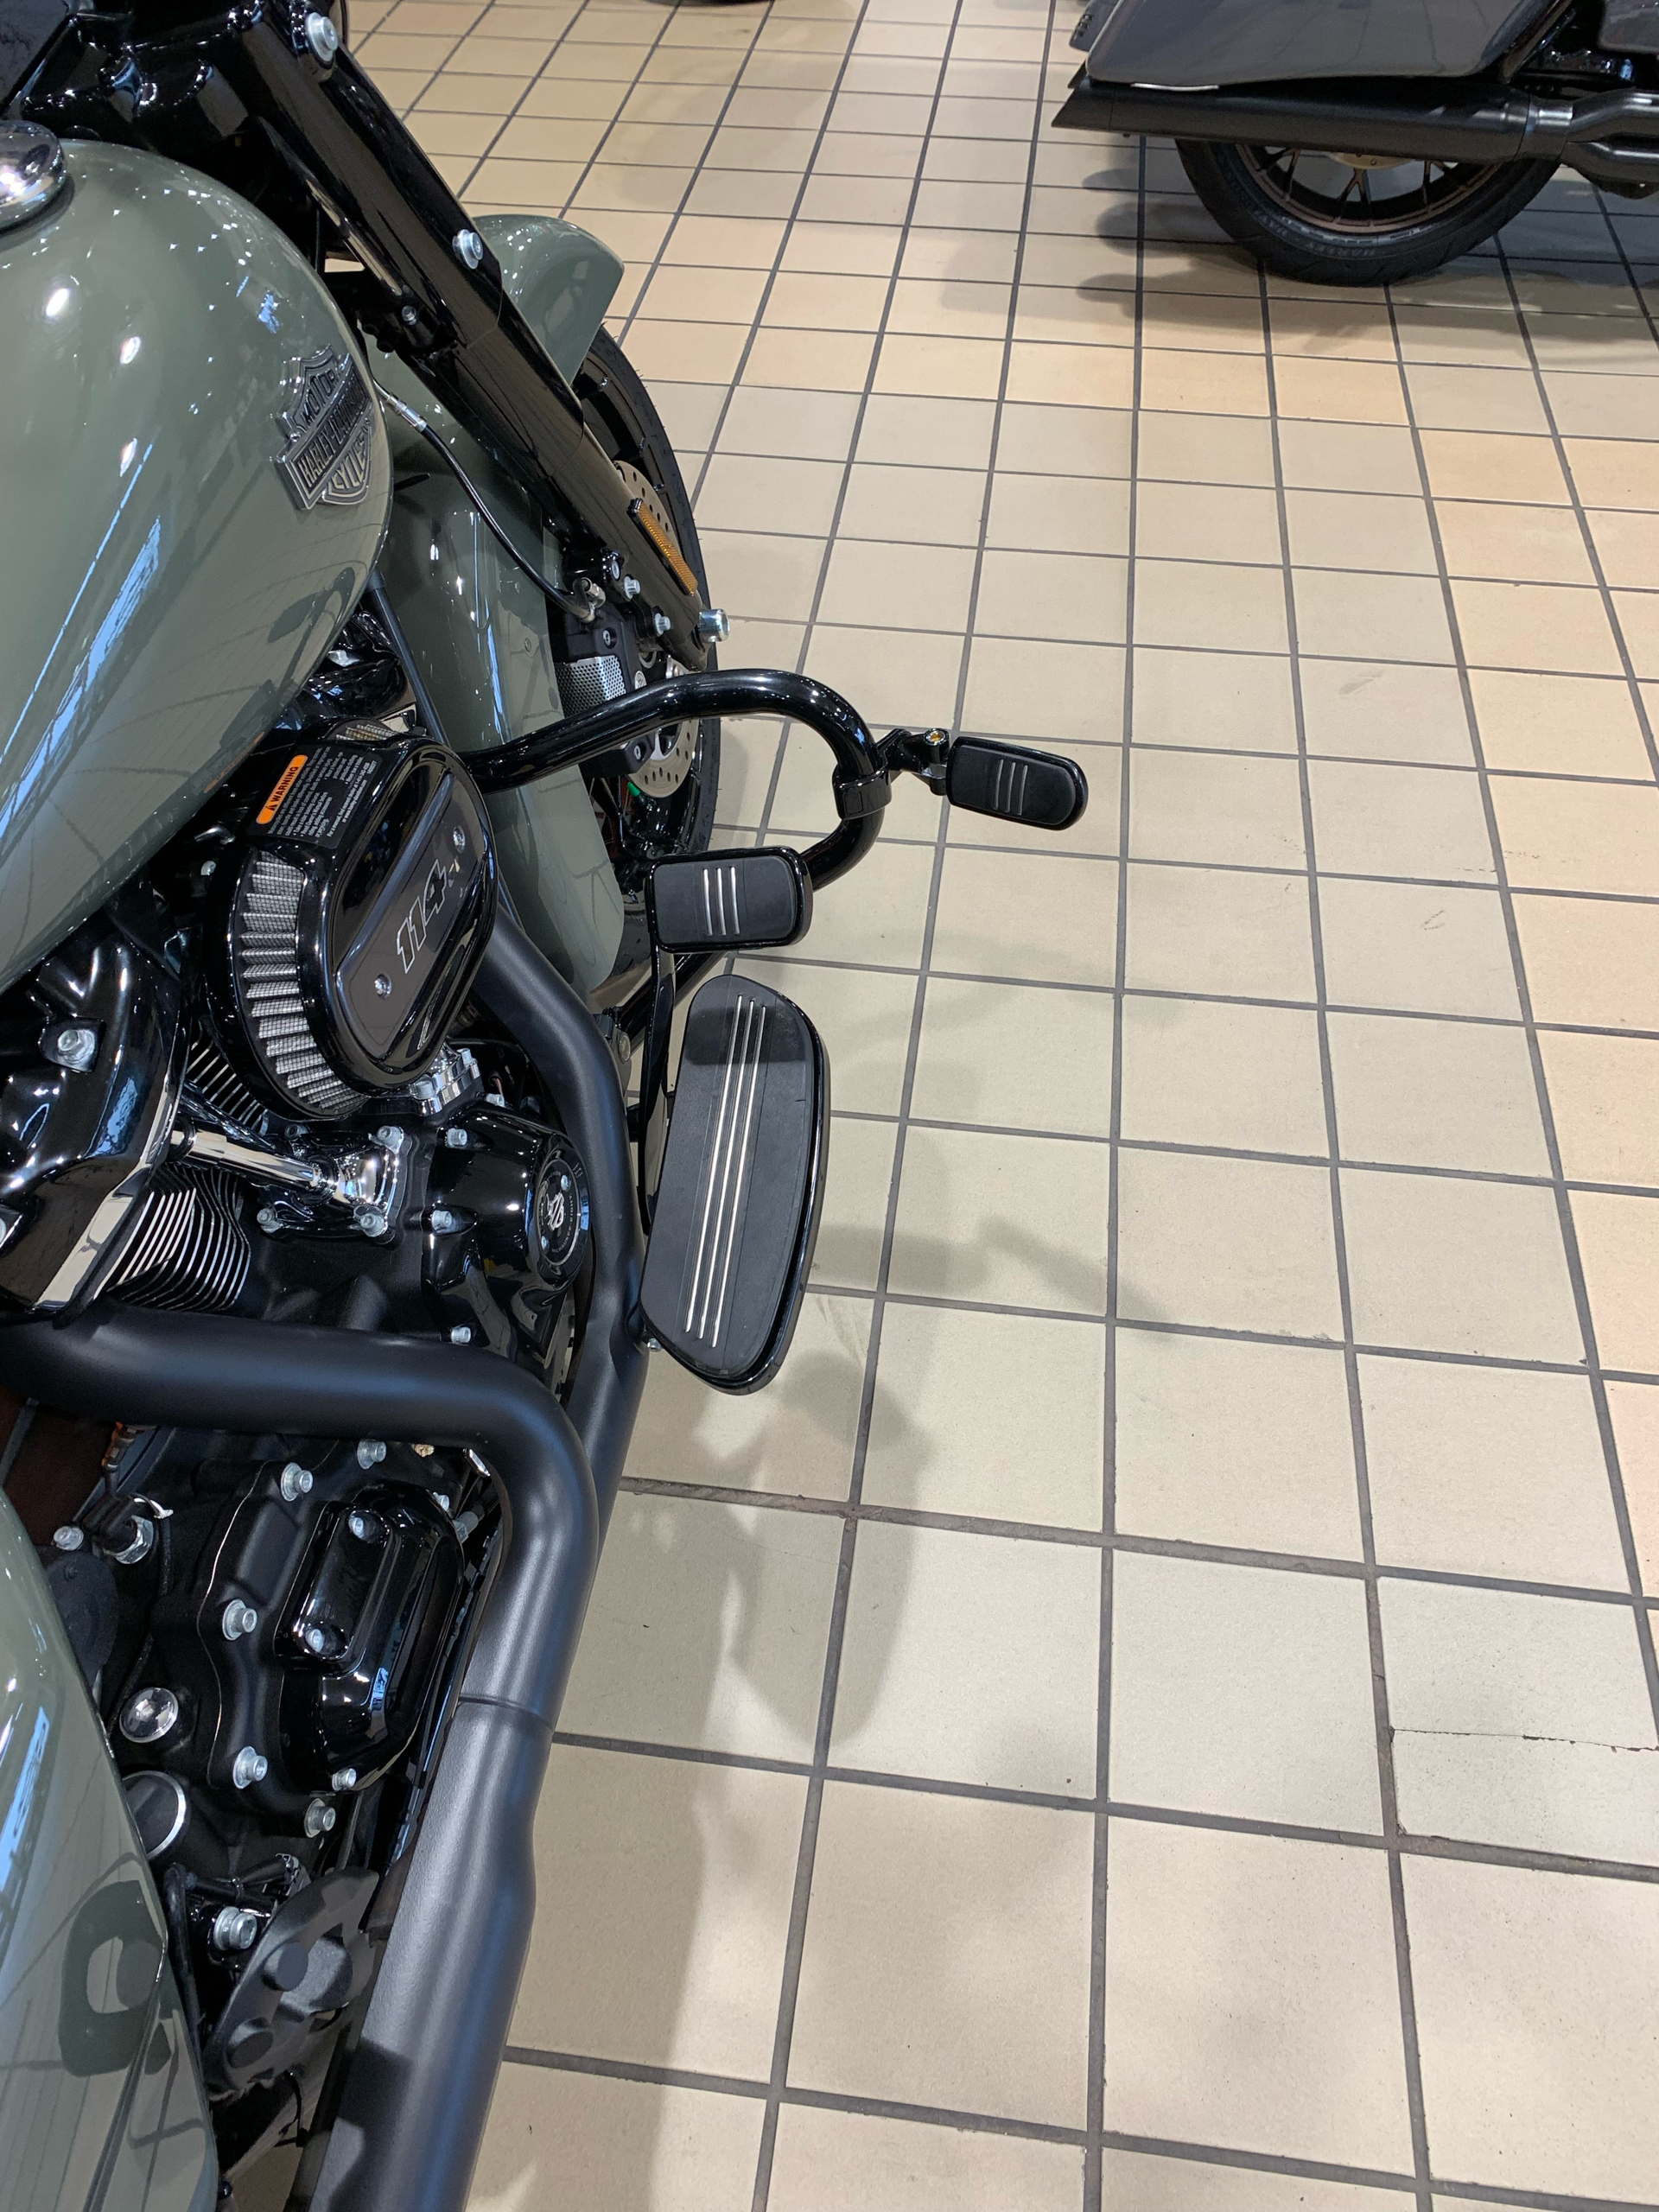 2021 Harley-Davidson ROAD KING SPECIAL in Dumfries, Virginia - Photo 4